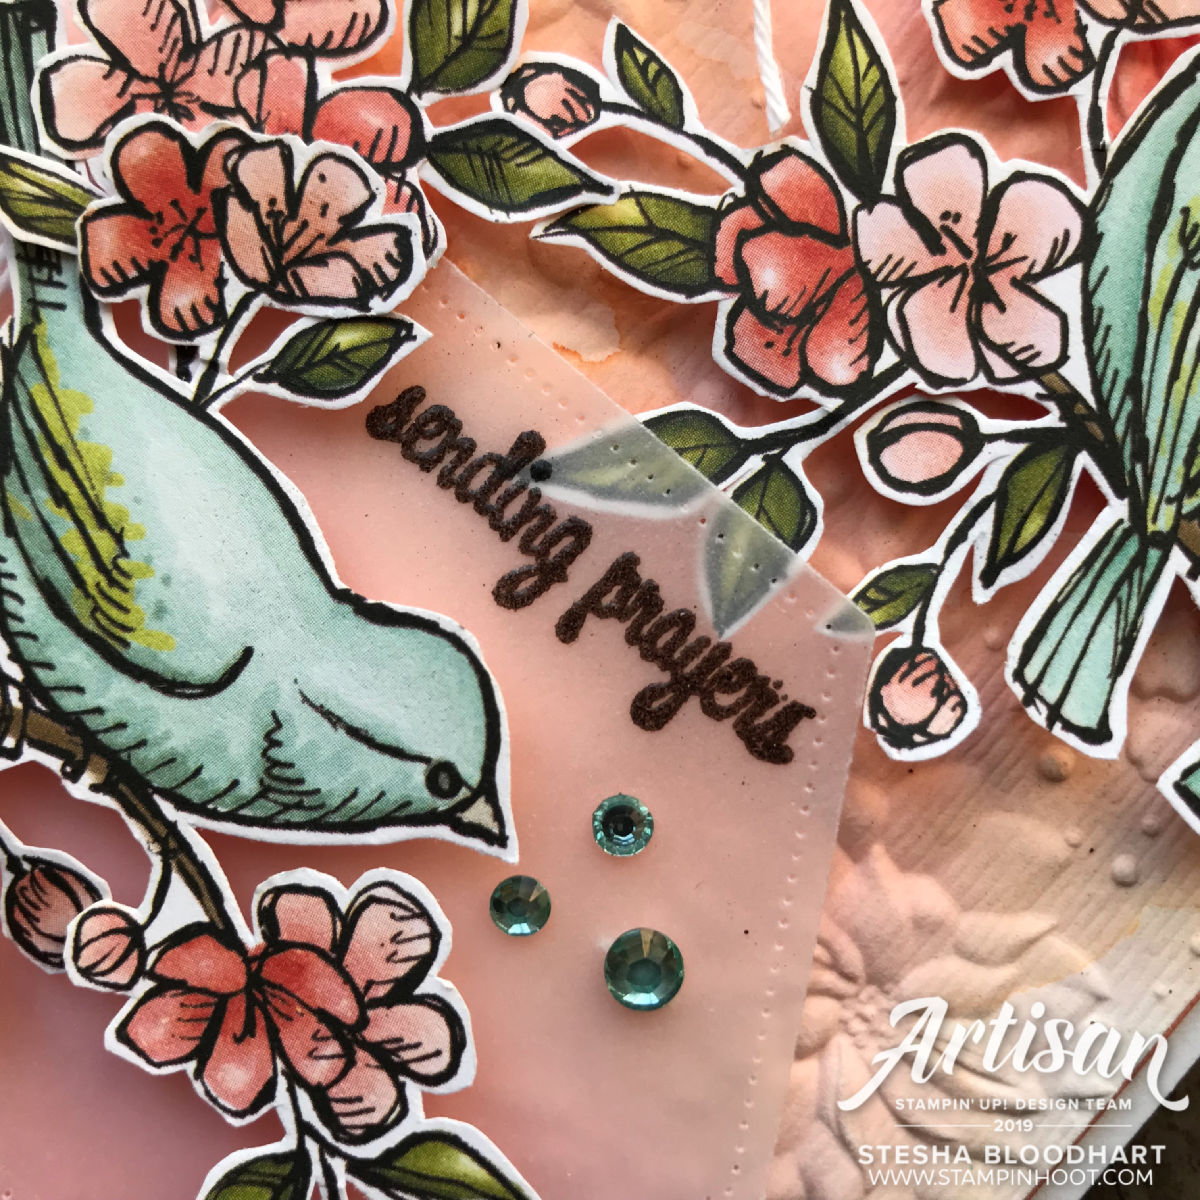 Country Floral 3D Embossing Folder & Bird Ballad Designer Series Paper by Stampin' Up! Card created by 2019 Artisan Stesha Bloodhart, Stampin' Hoot!